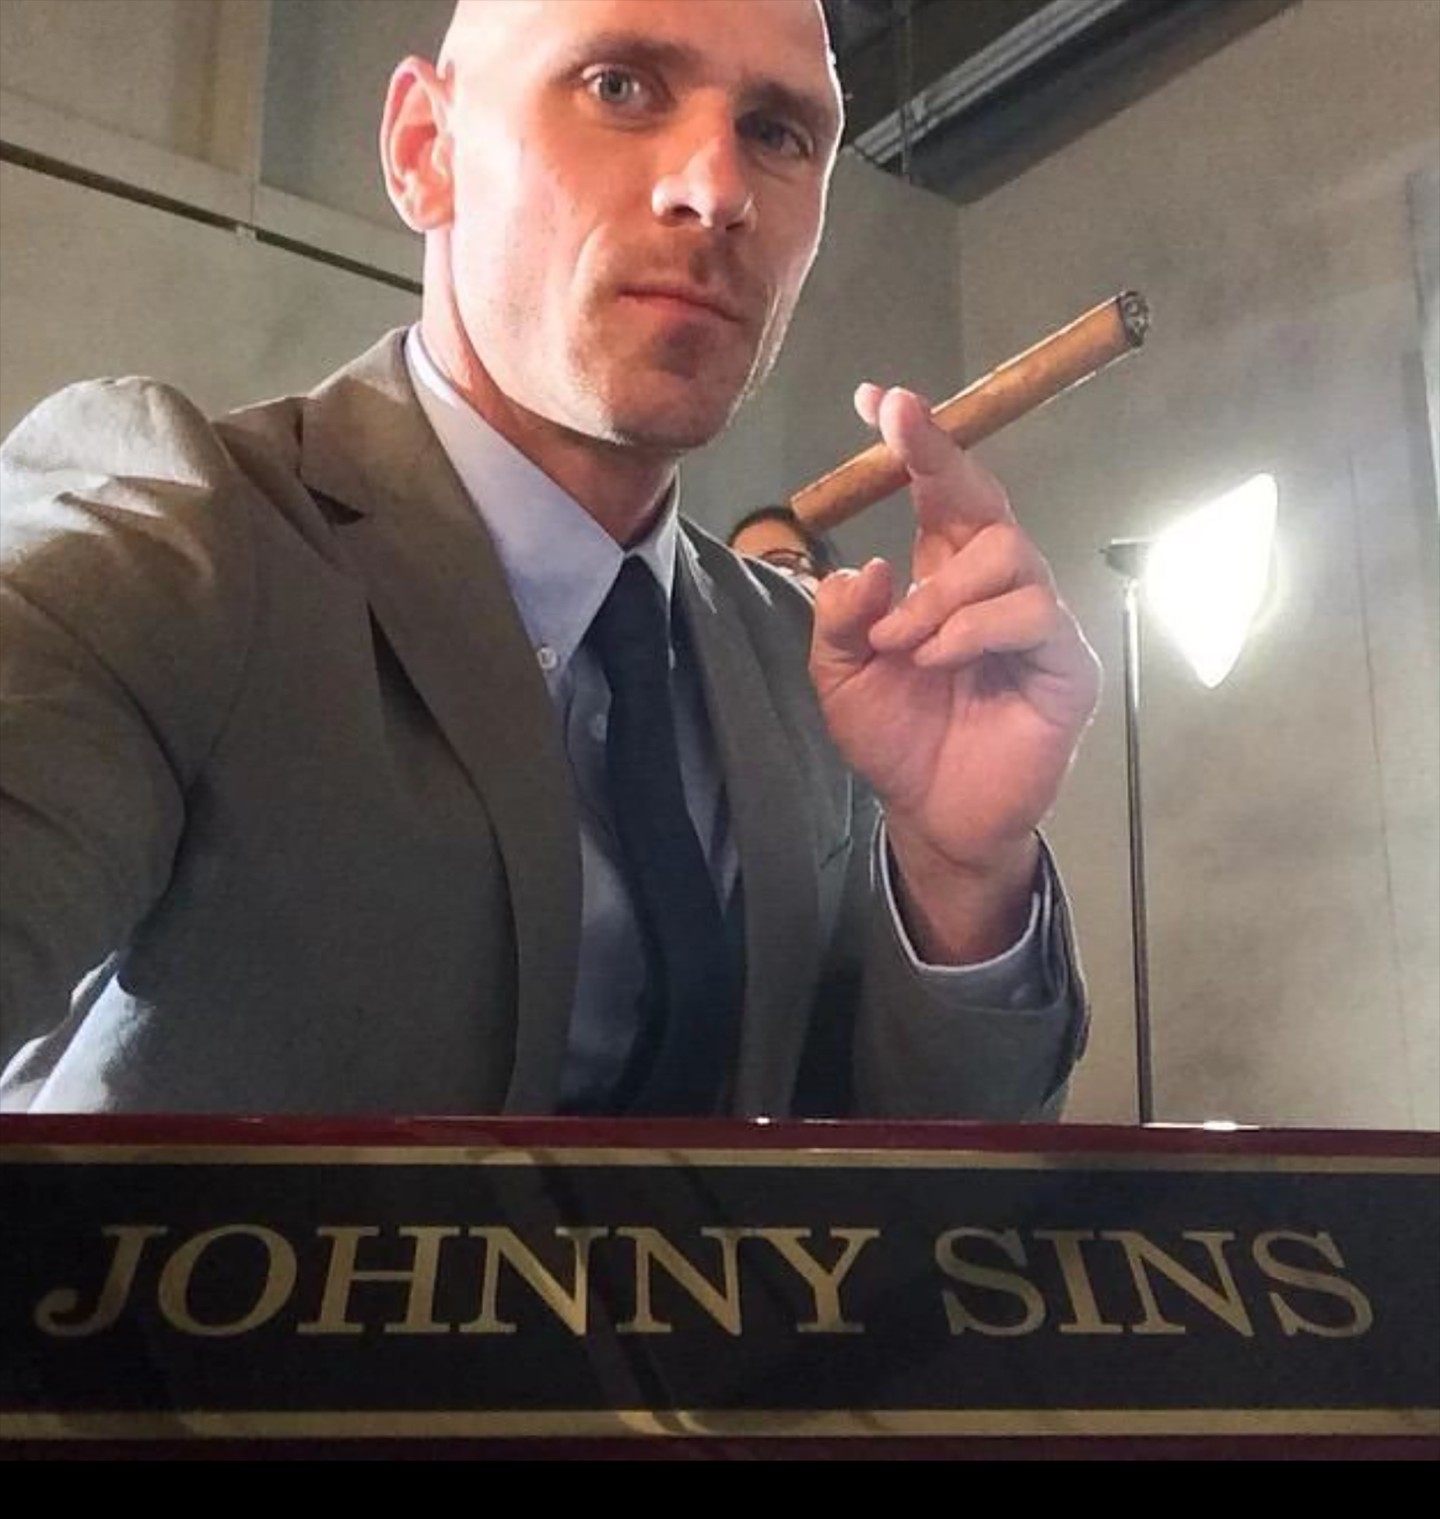 Johnny Sins Force To Fuck Vifeos - An Interview With Johnny Sins: The Most Hardworking Man in The World